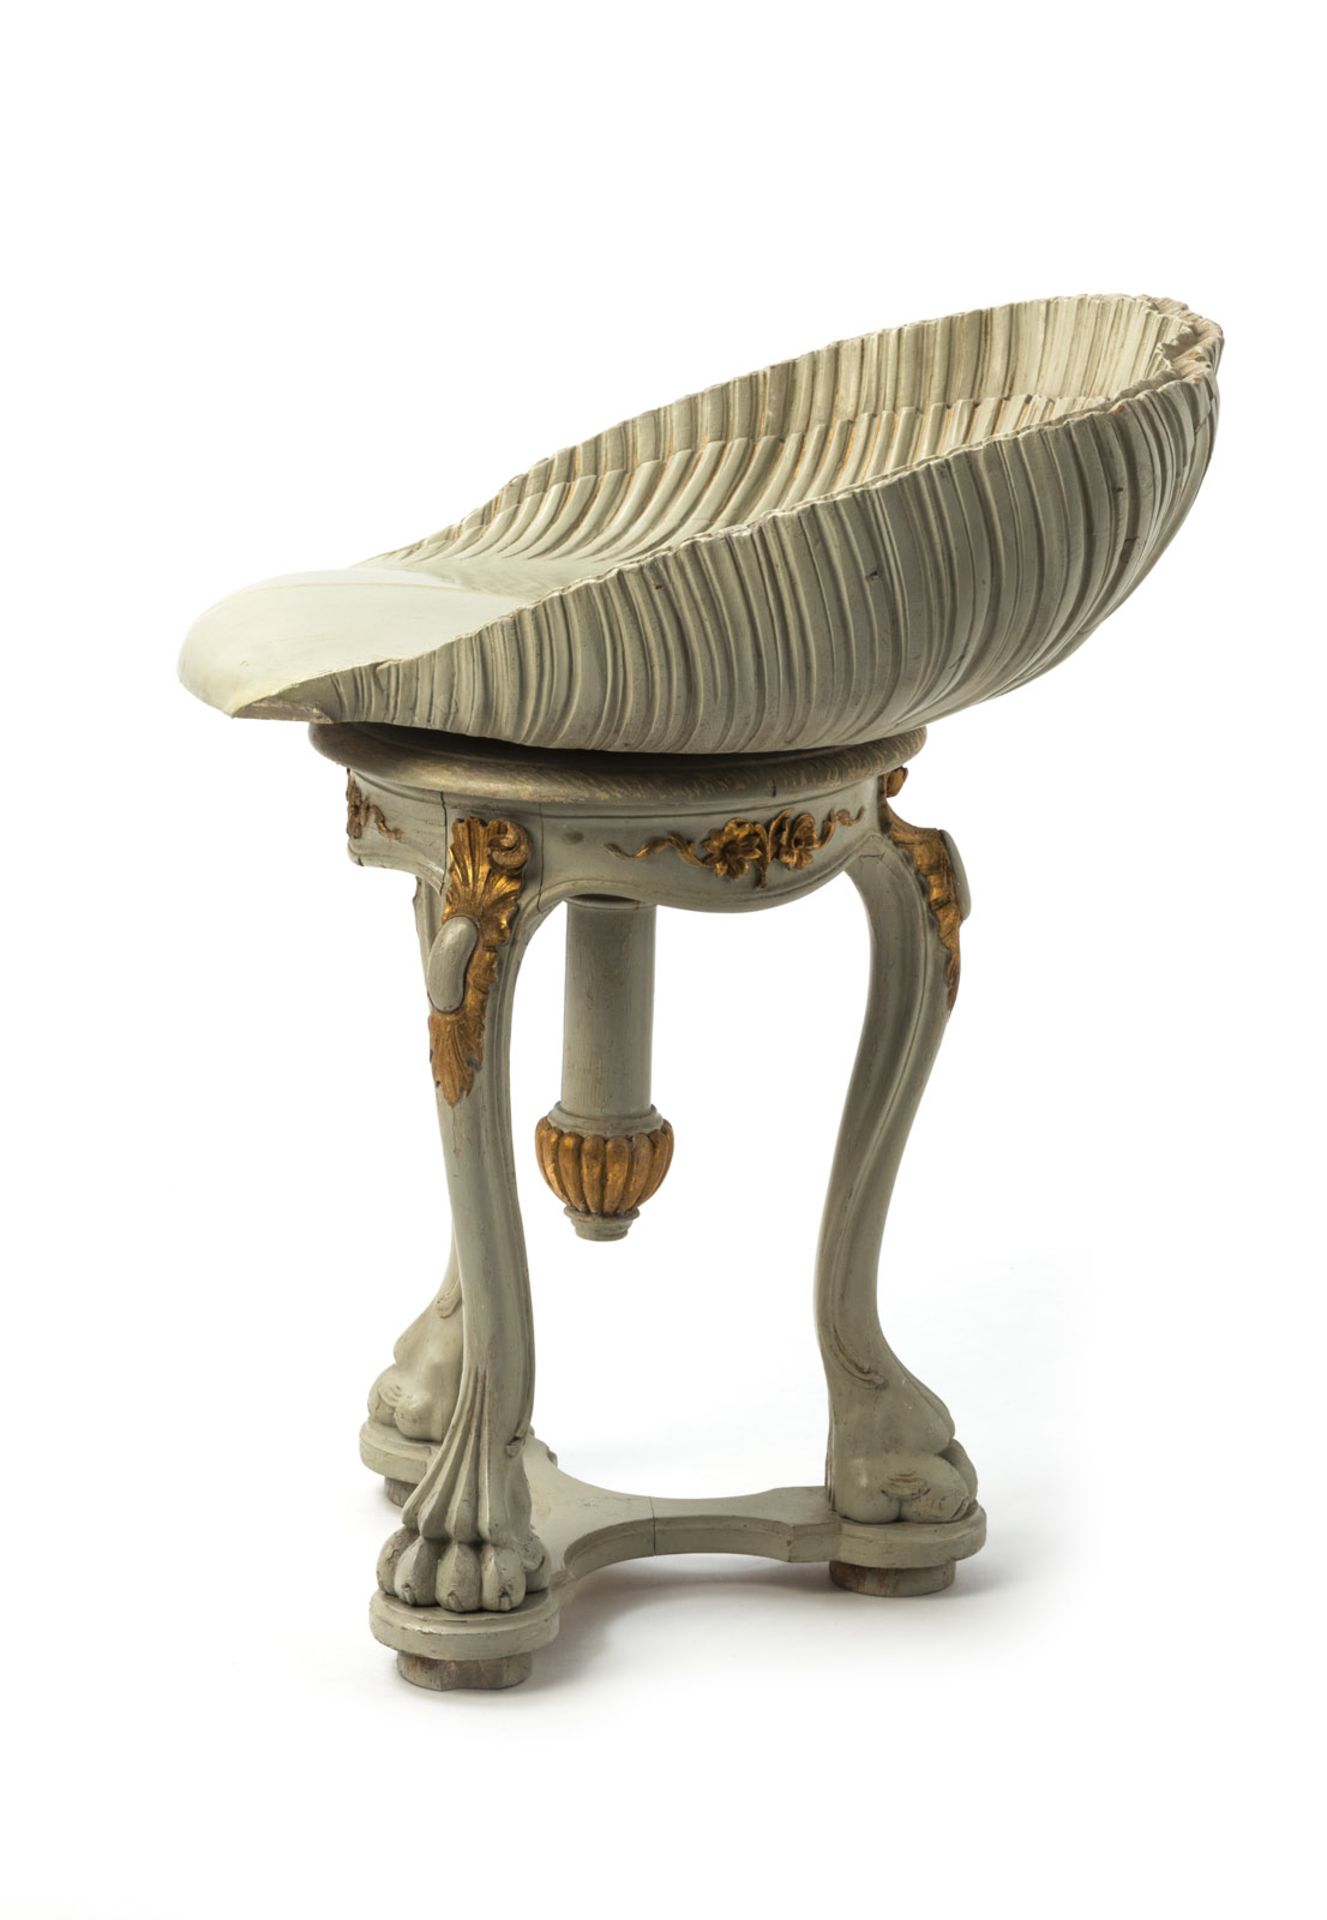 A BAROQUE STYLE PIANO STOOL WITH SHELL SHAPED SEAT - Image 4 of 4